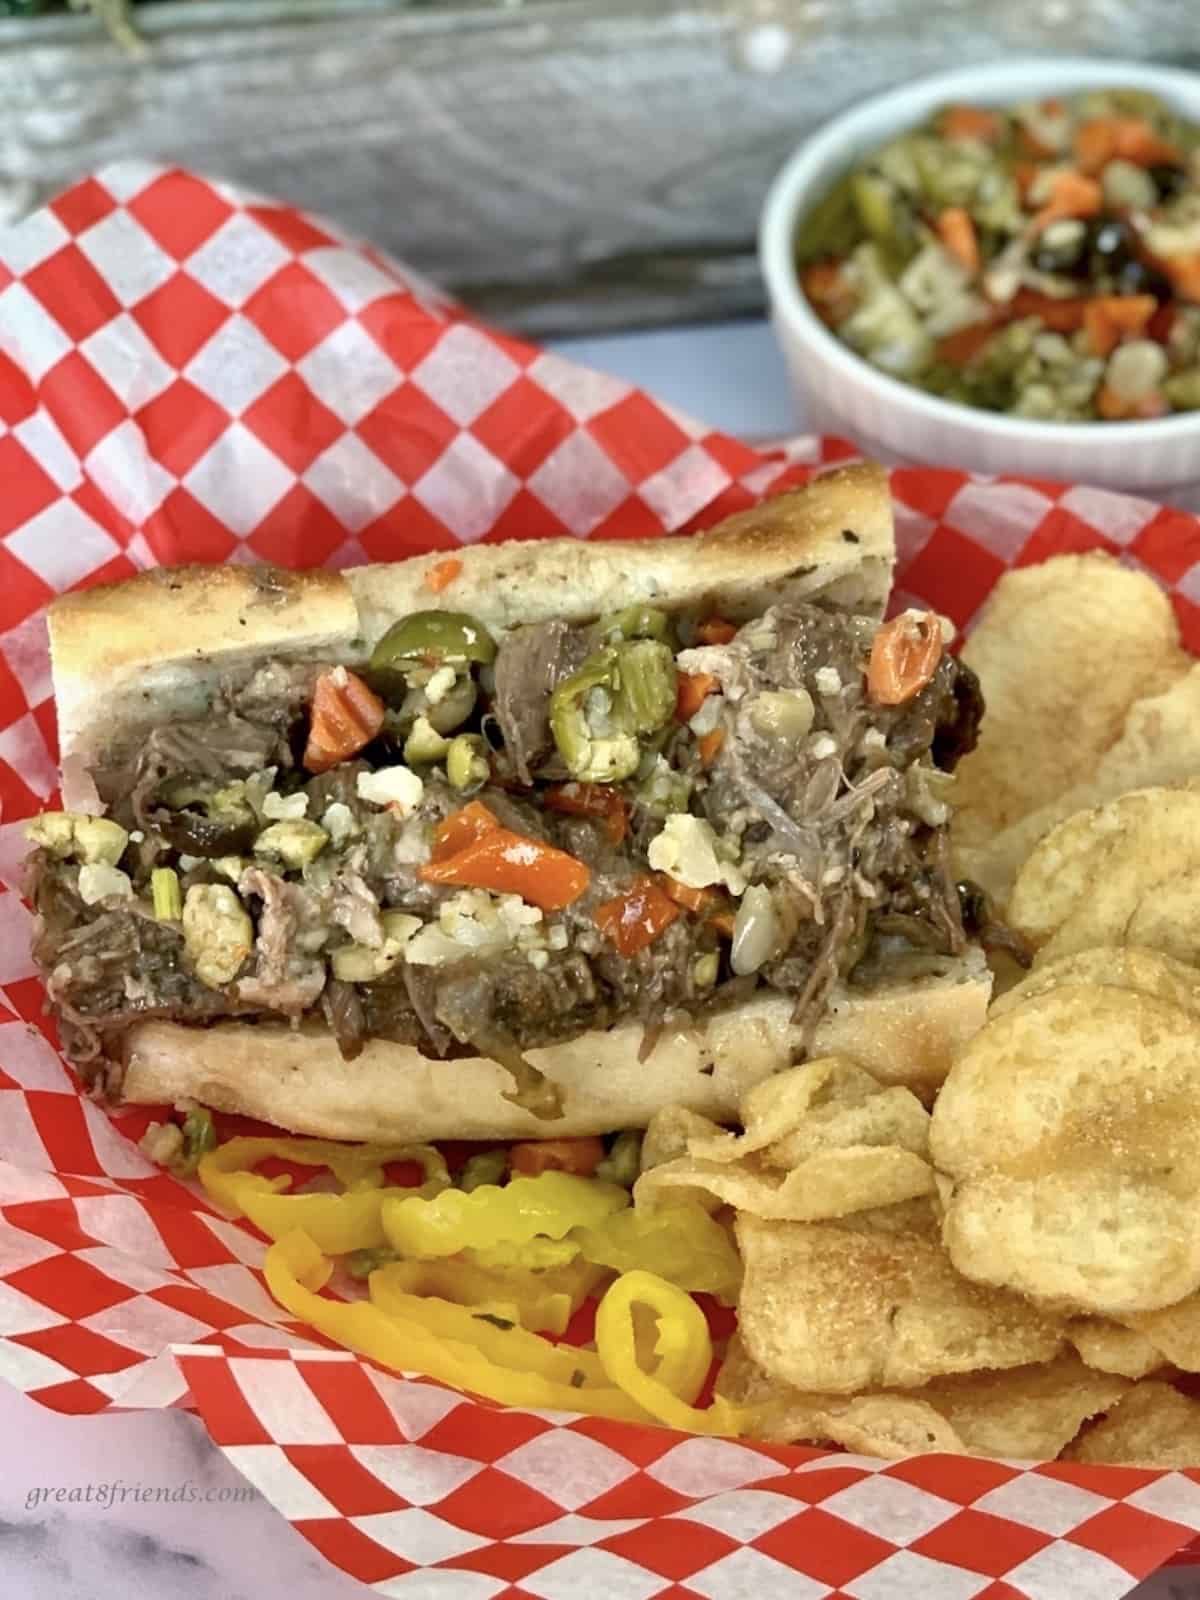 Chicago Italian Beef Sandwich in a basket with a red and white paper liner and potato chips, peppers and Giardiniera on the side.